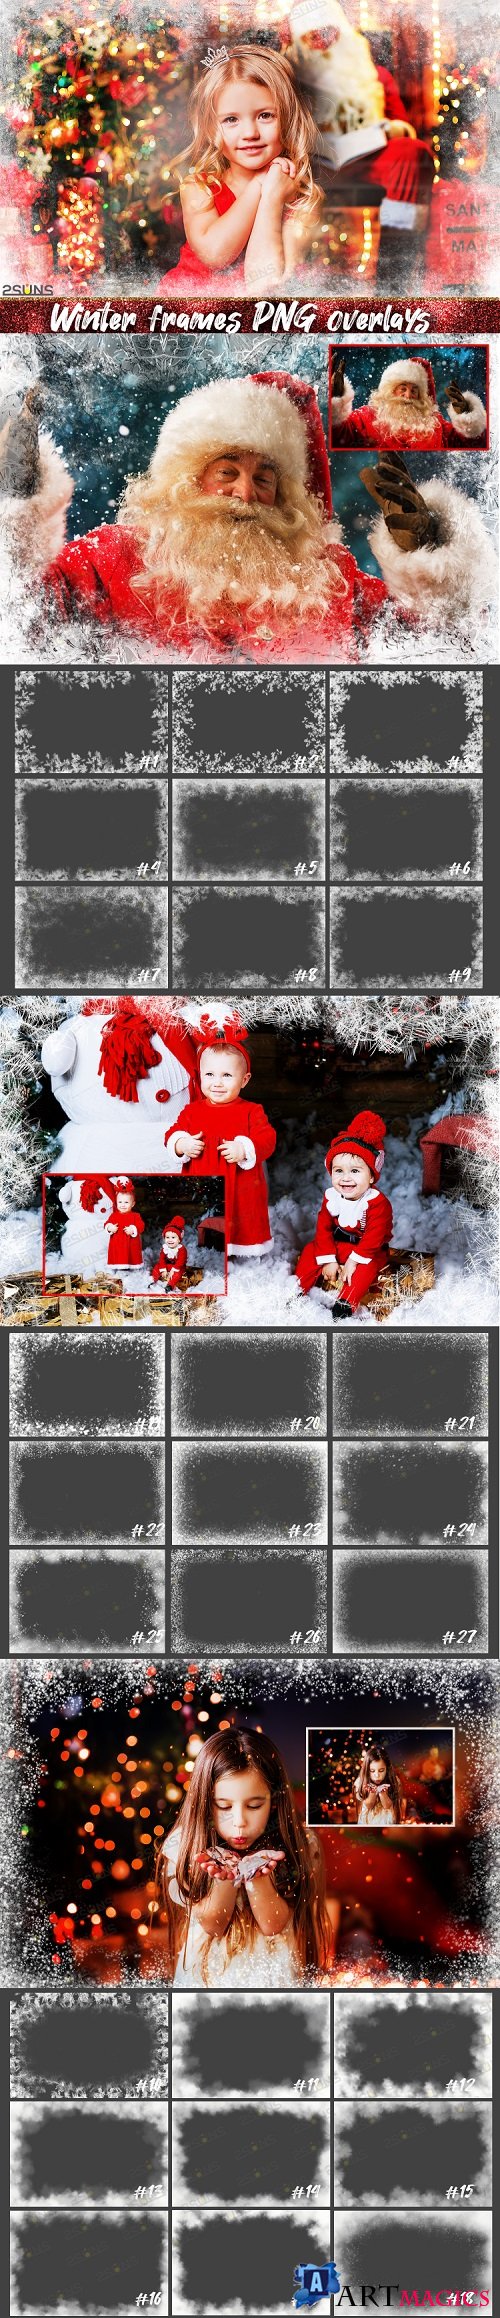 Download photo overlays, christmas winter frames PNG - 407181